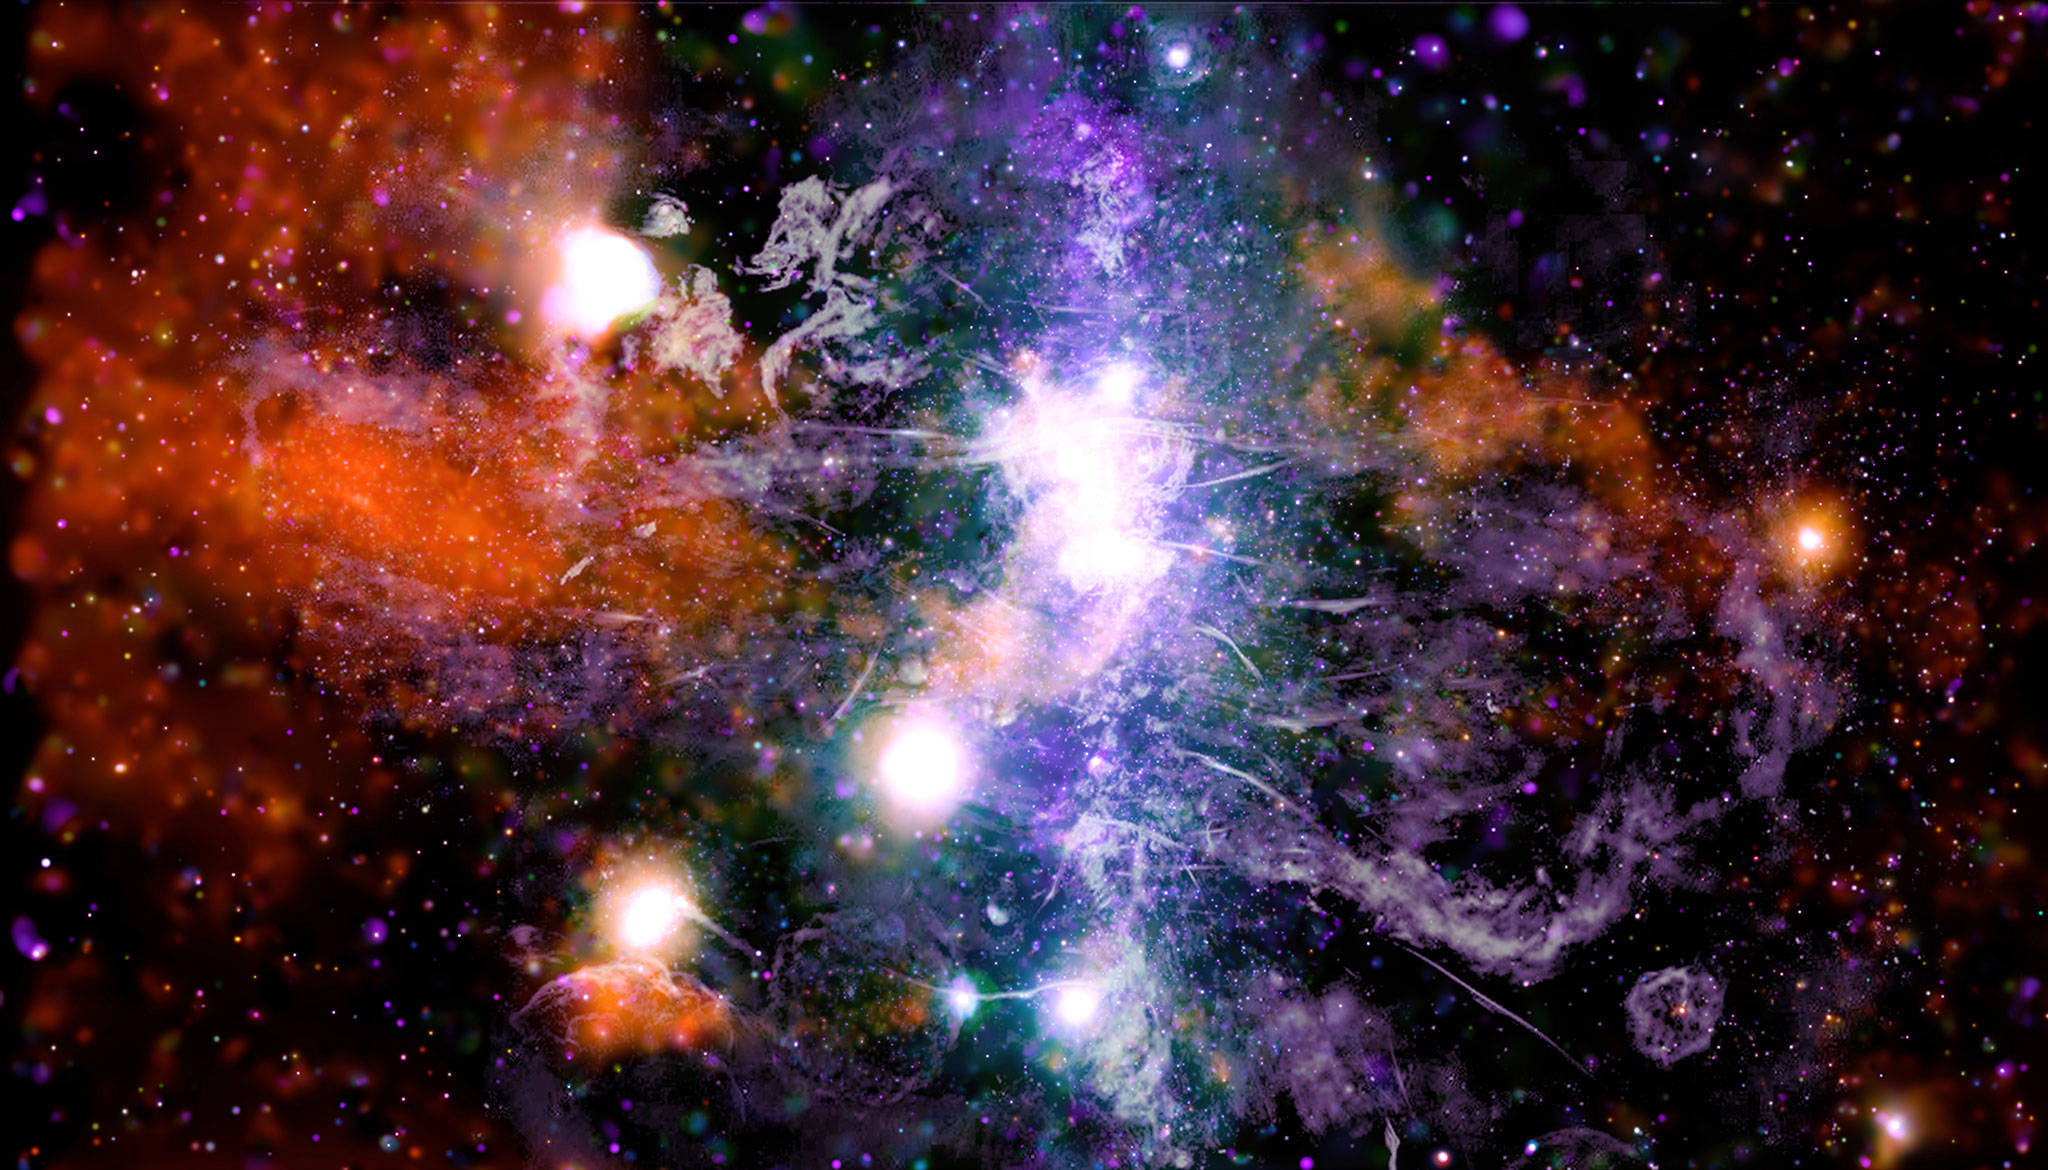 This false-color X-ray and radio frequency image made available by NASA on May 28, shows threads of superheated gas and magnetic fields at the center of the Milky Way galaxy. X-rays detected by the NASA’s Chandra X-ray Observatory are in orange, green, blue and purple, and radio data from the MeerKAT radio telescope in South Africa are shown in lilac and gray. Astronomer Daniel Wang of the University of Massachusetts Amherst said Friday he spent a year working on this, while stuck at home during the pandemic. (NASA via AP)